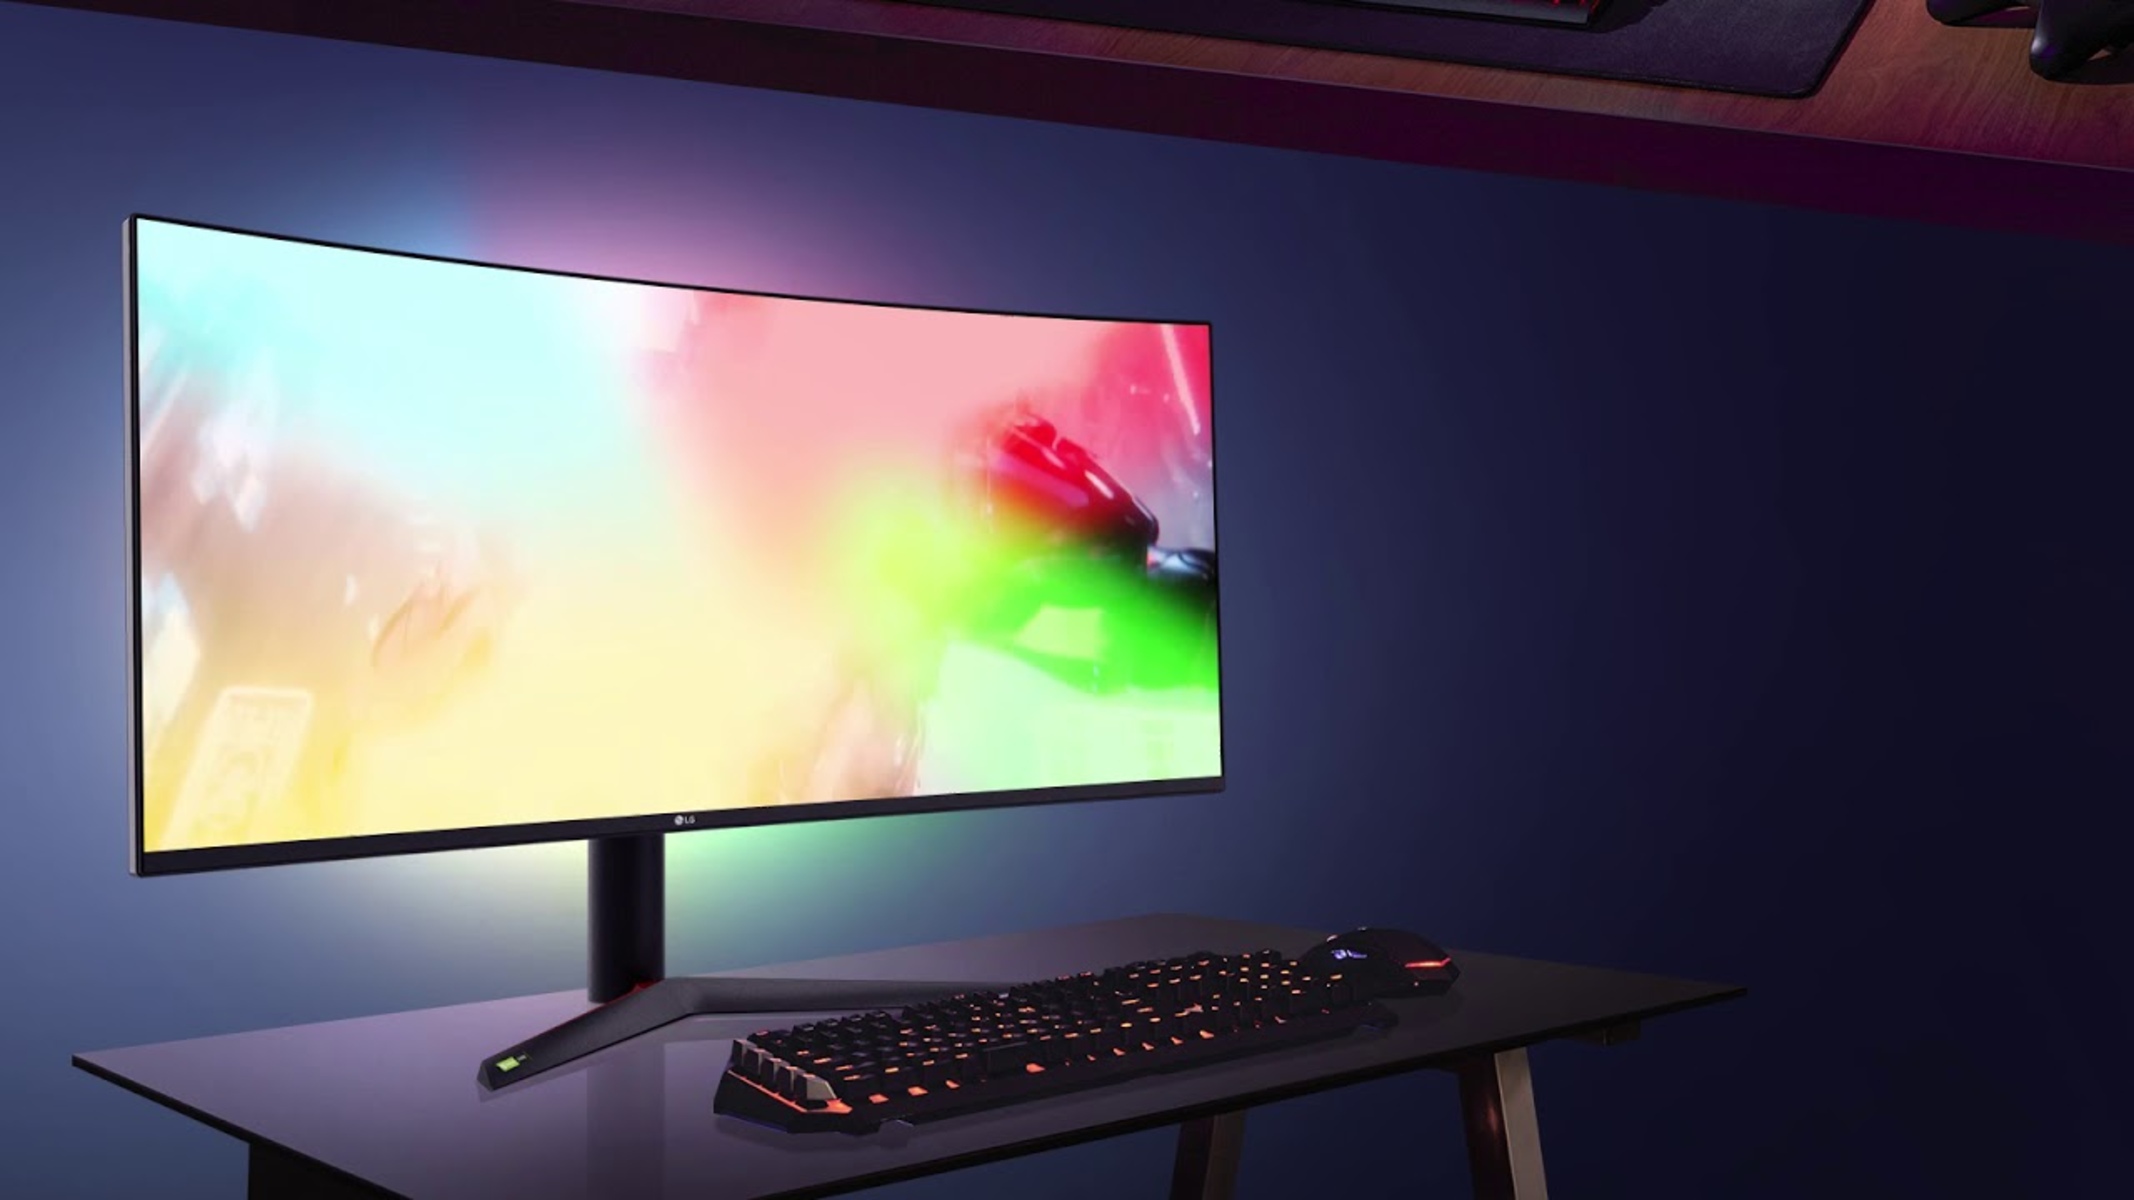 LG Gaming Monitor: How To Turn On Lights